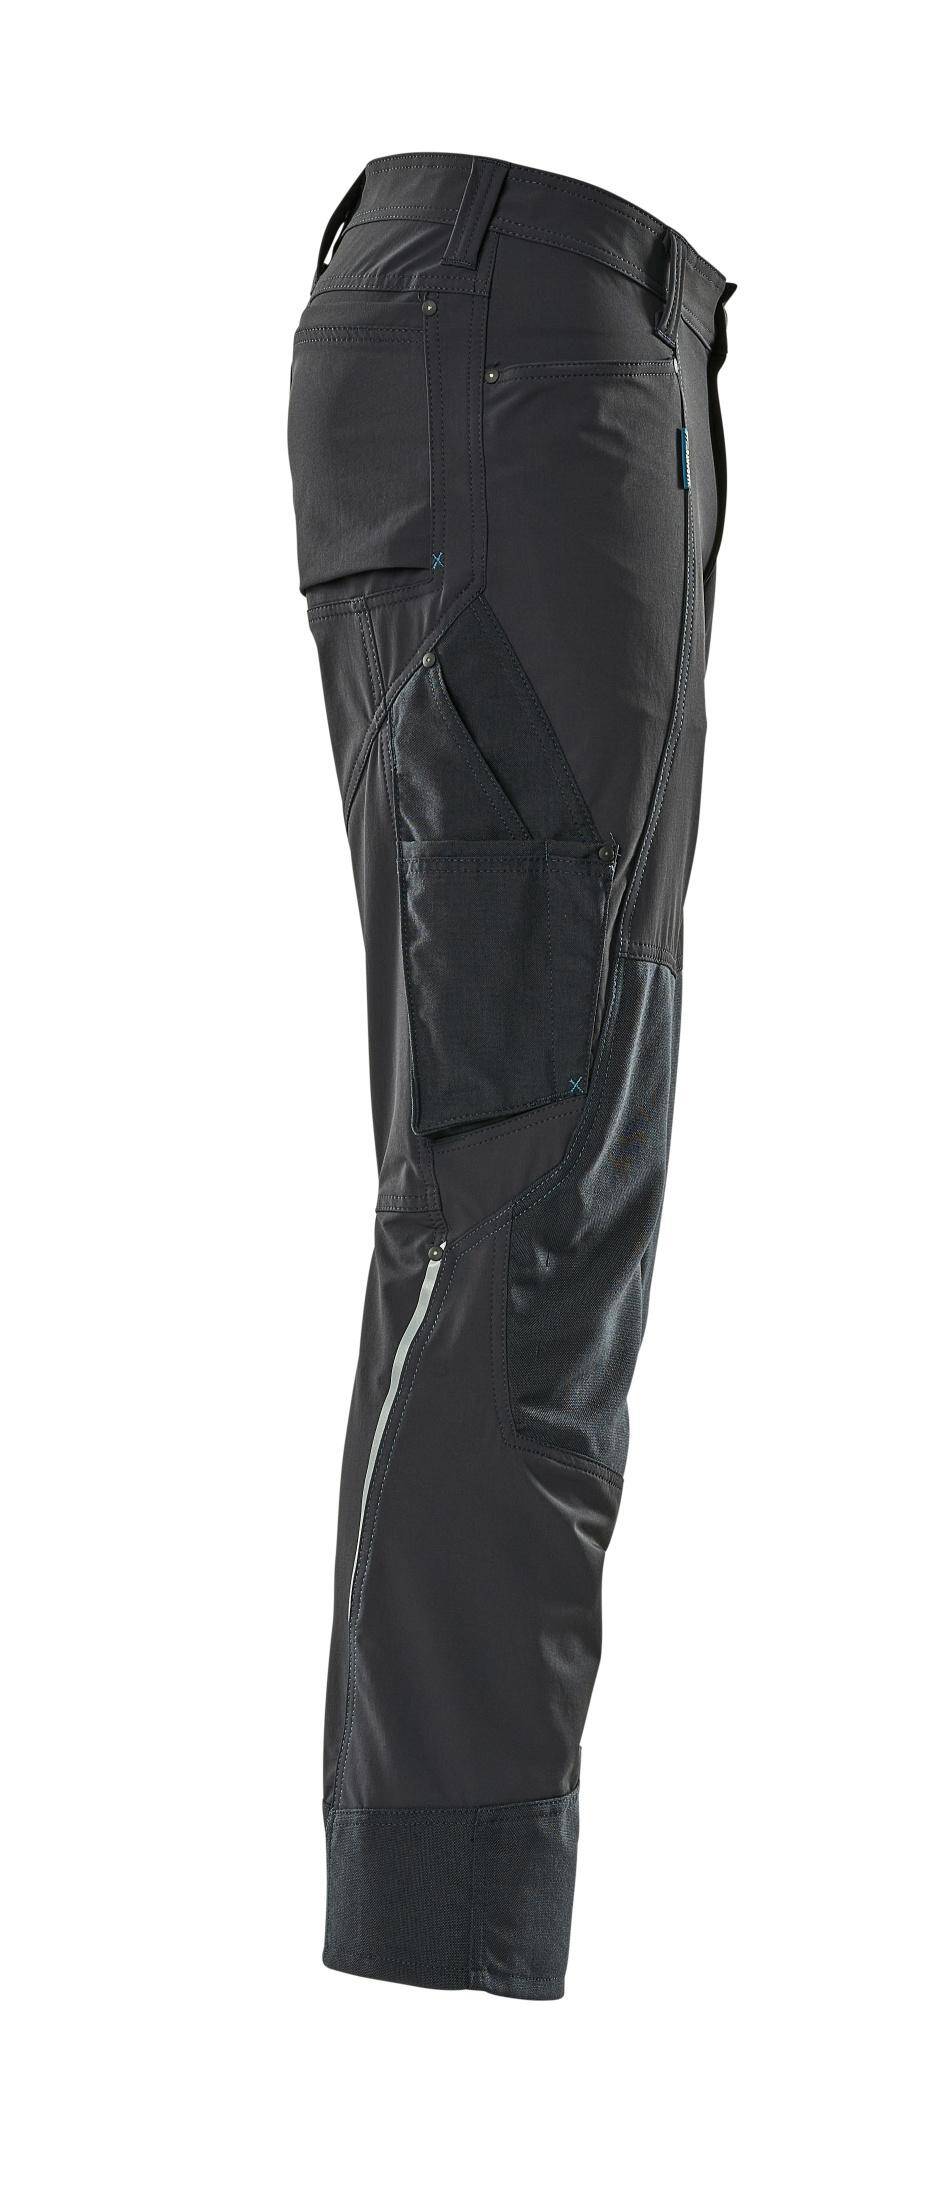 Trousers with kneepad pockets Advanced navy blue (Photo 2)